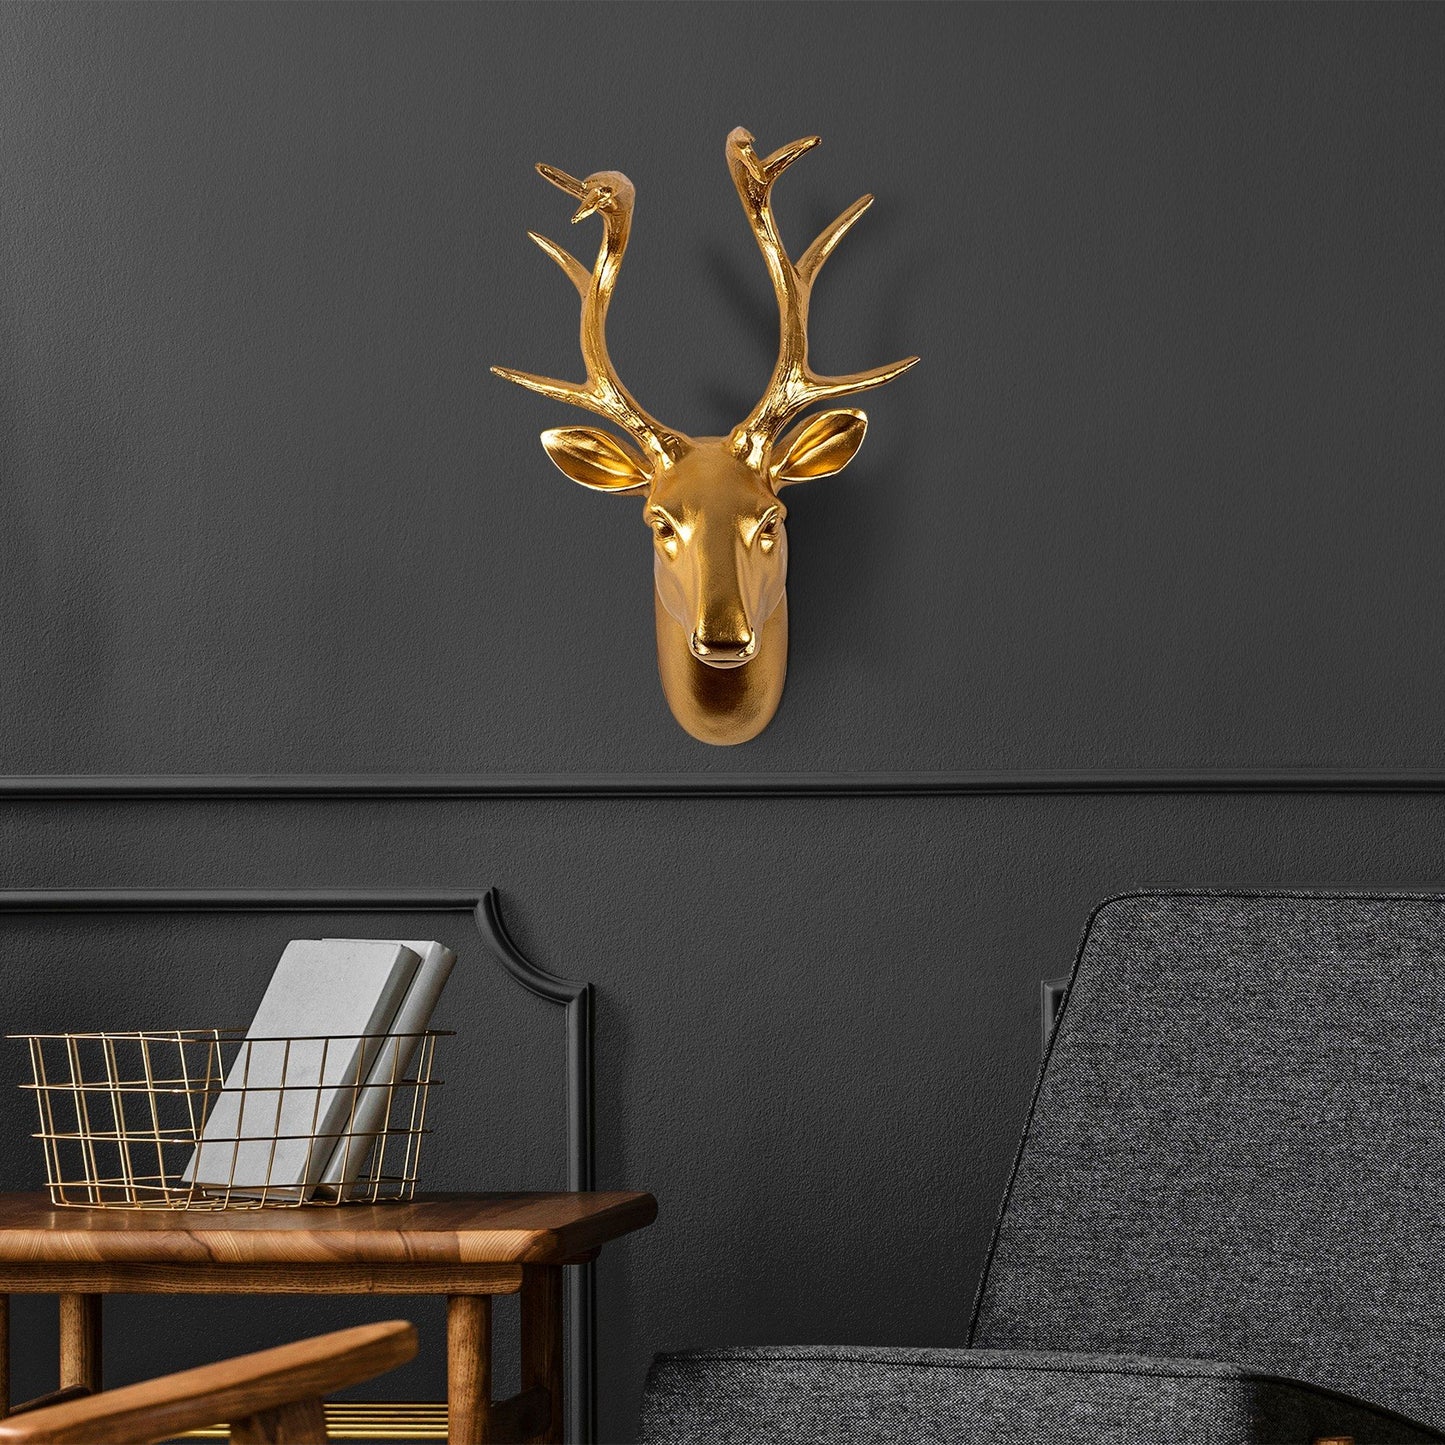 Bust of Deer - 1 - Decorative Wall Accessory